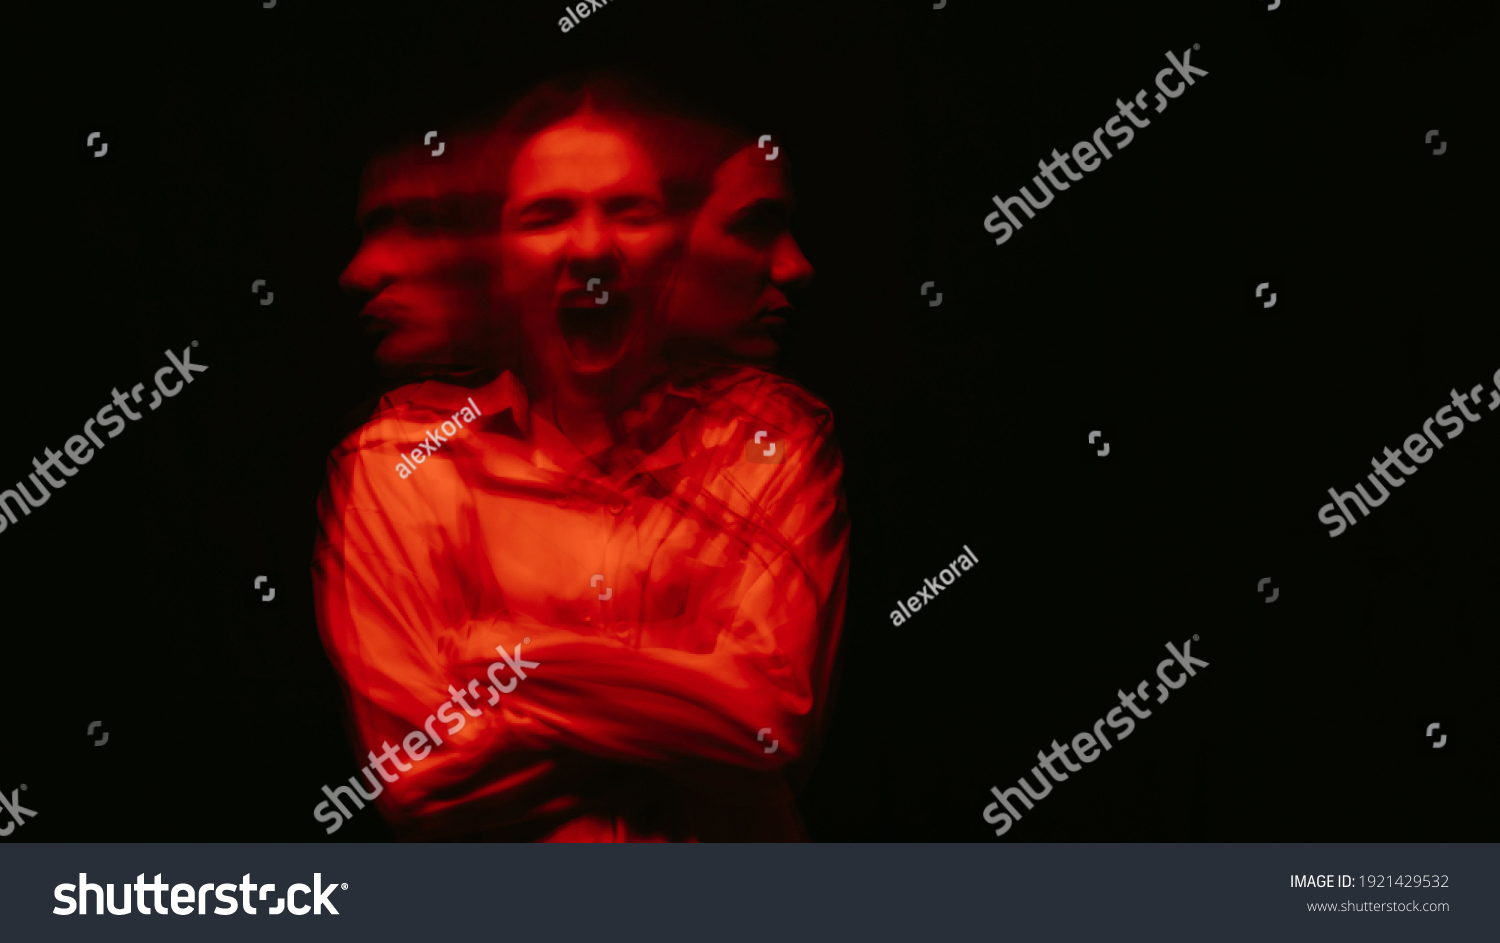 blurry portrait of a schizophrenic woman with paranoid disorders and bipolar disease on a dark background #1921429532